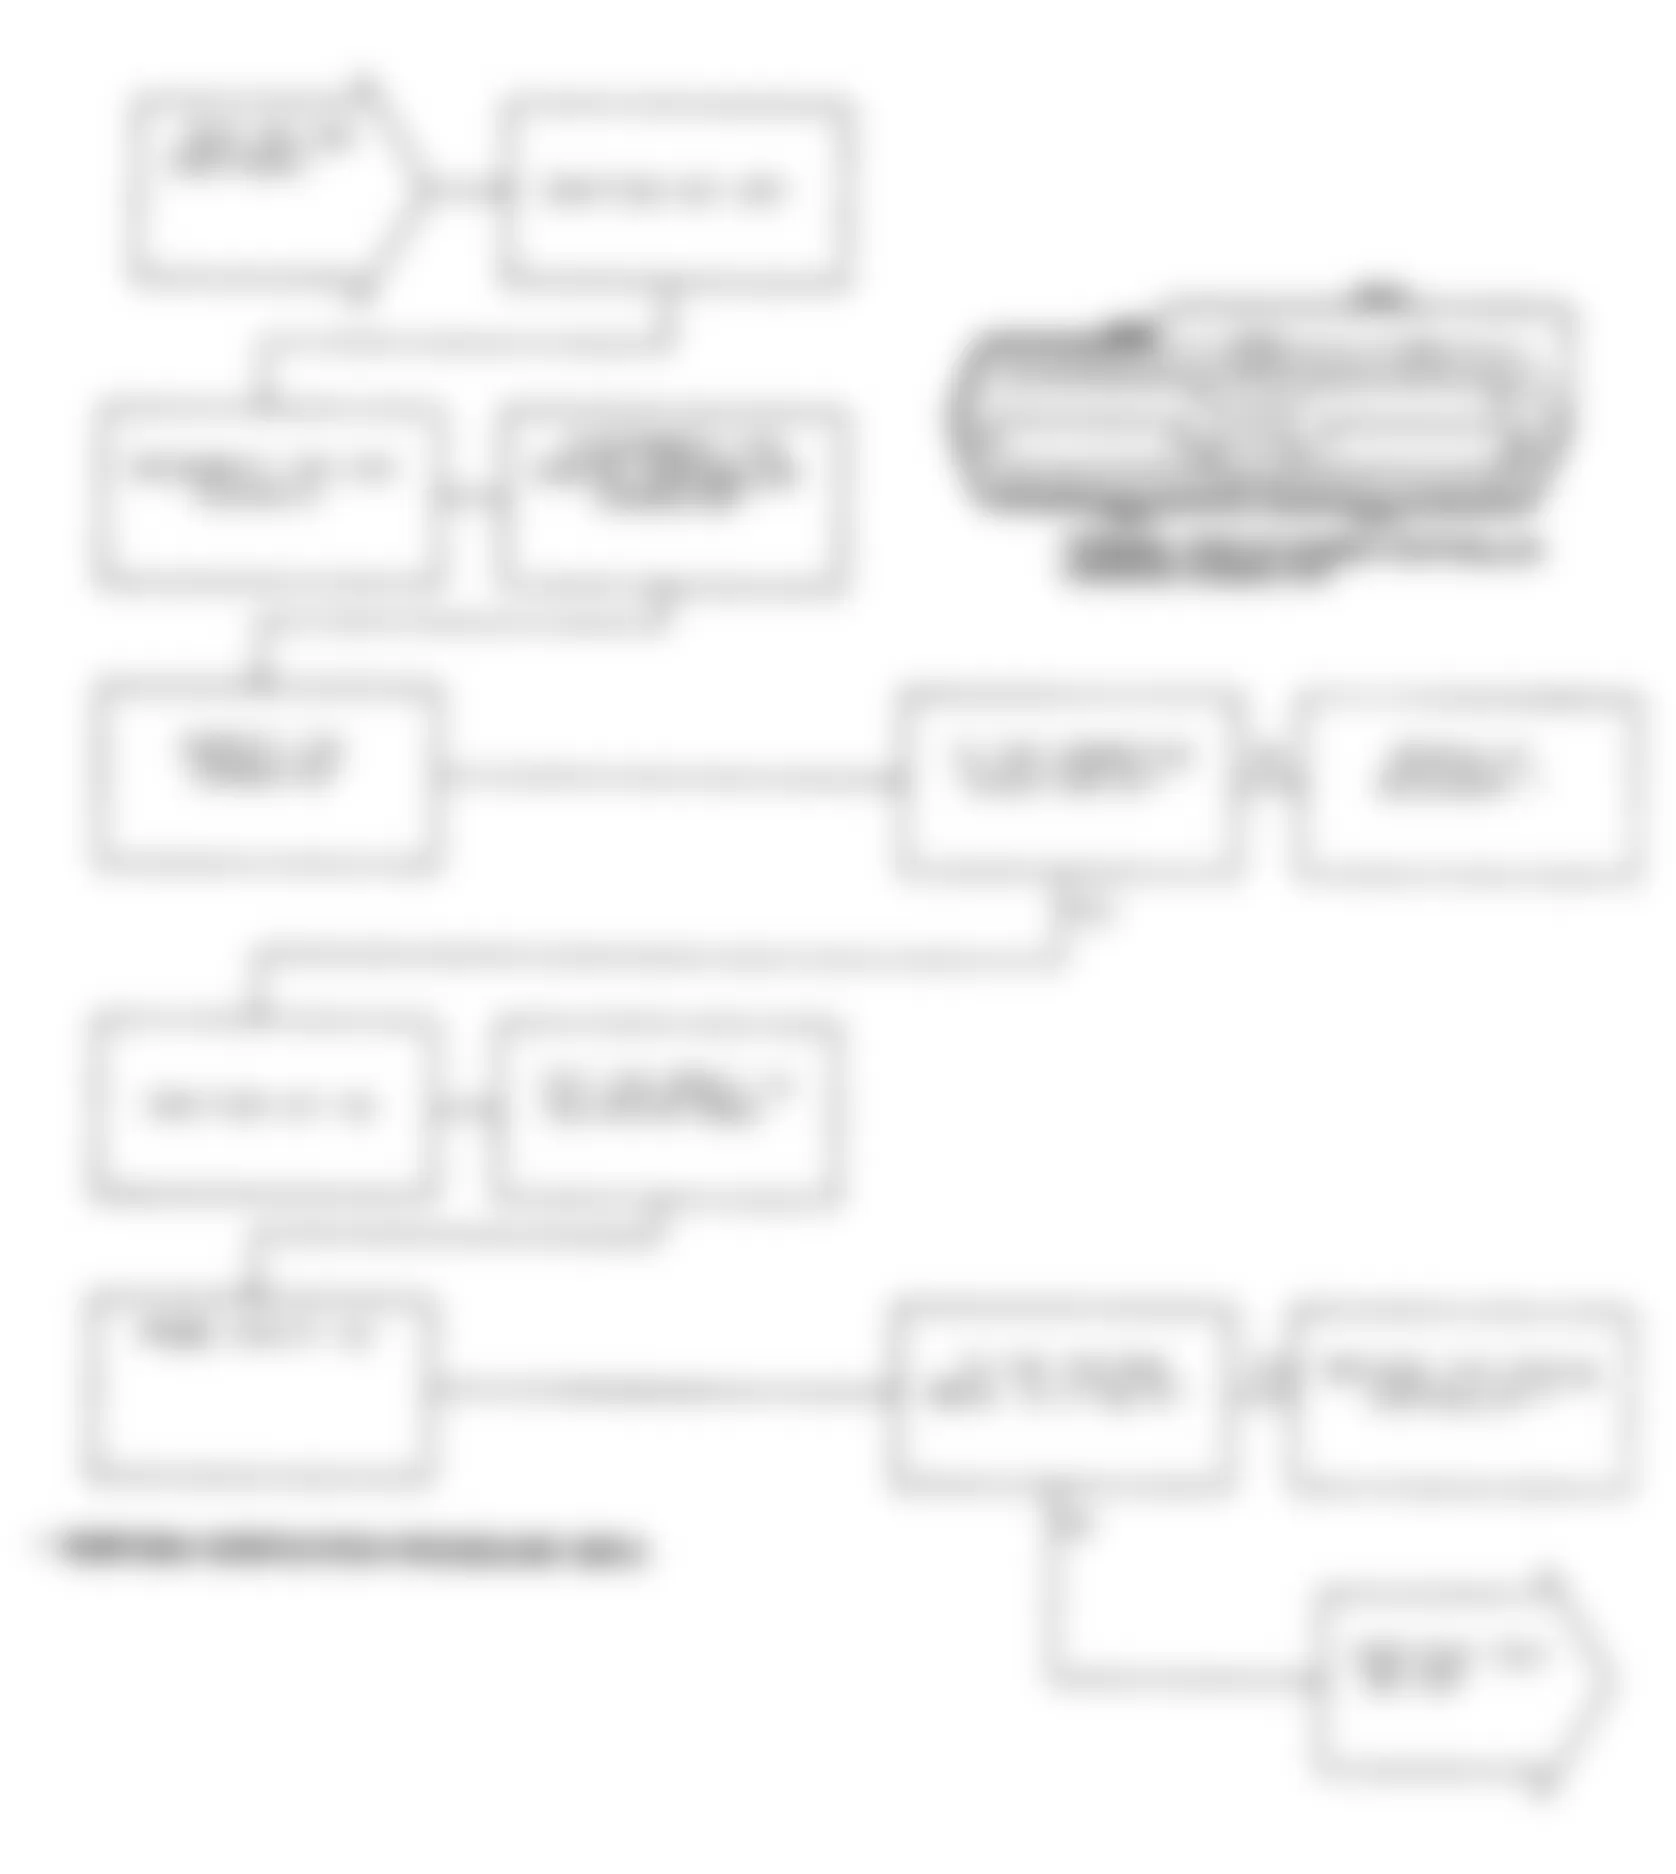 Chrysler LeBaron LX 1991 - Component Locations -  Test DR-19A Code 32, Diagnostic Flow Chart (2 of 3)